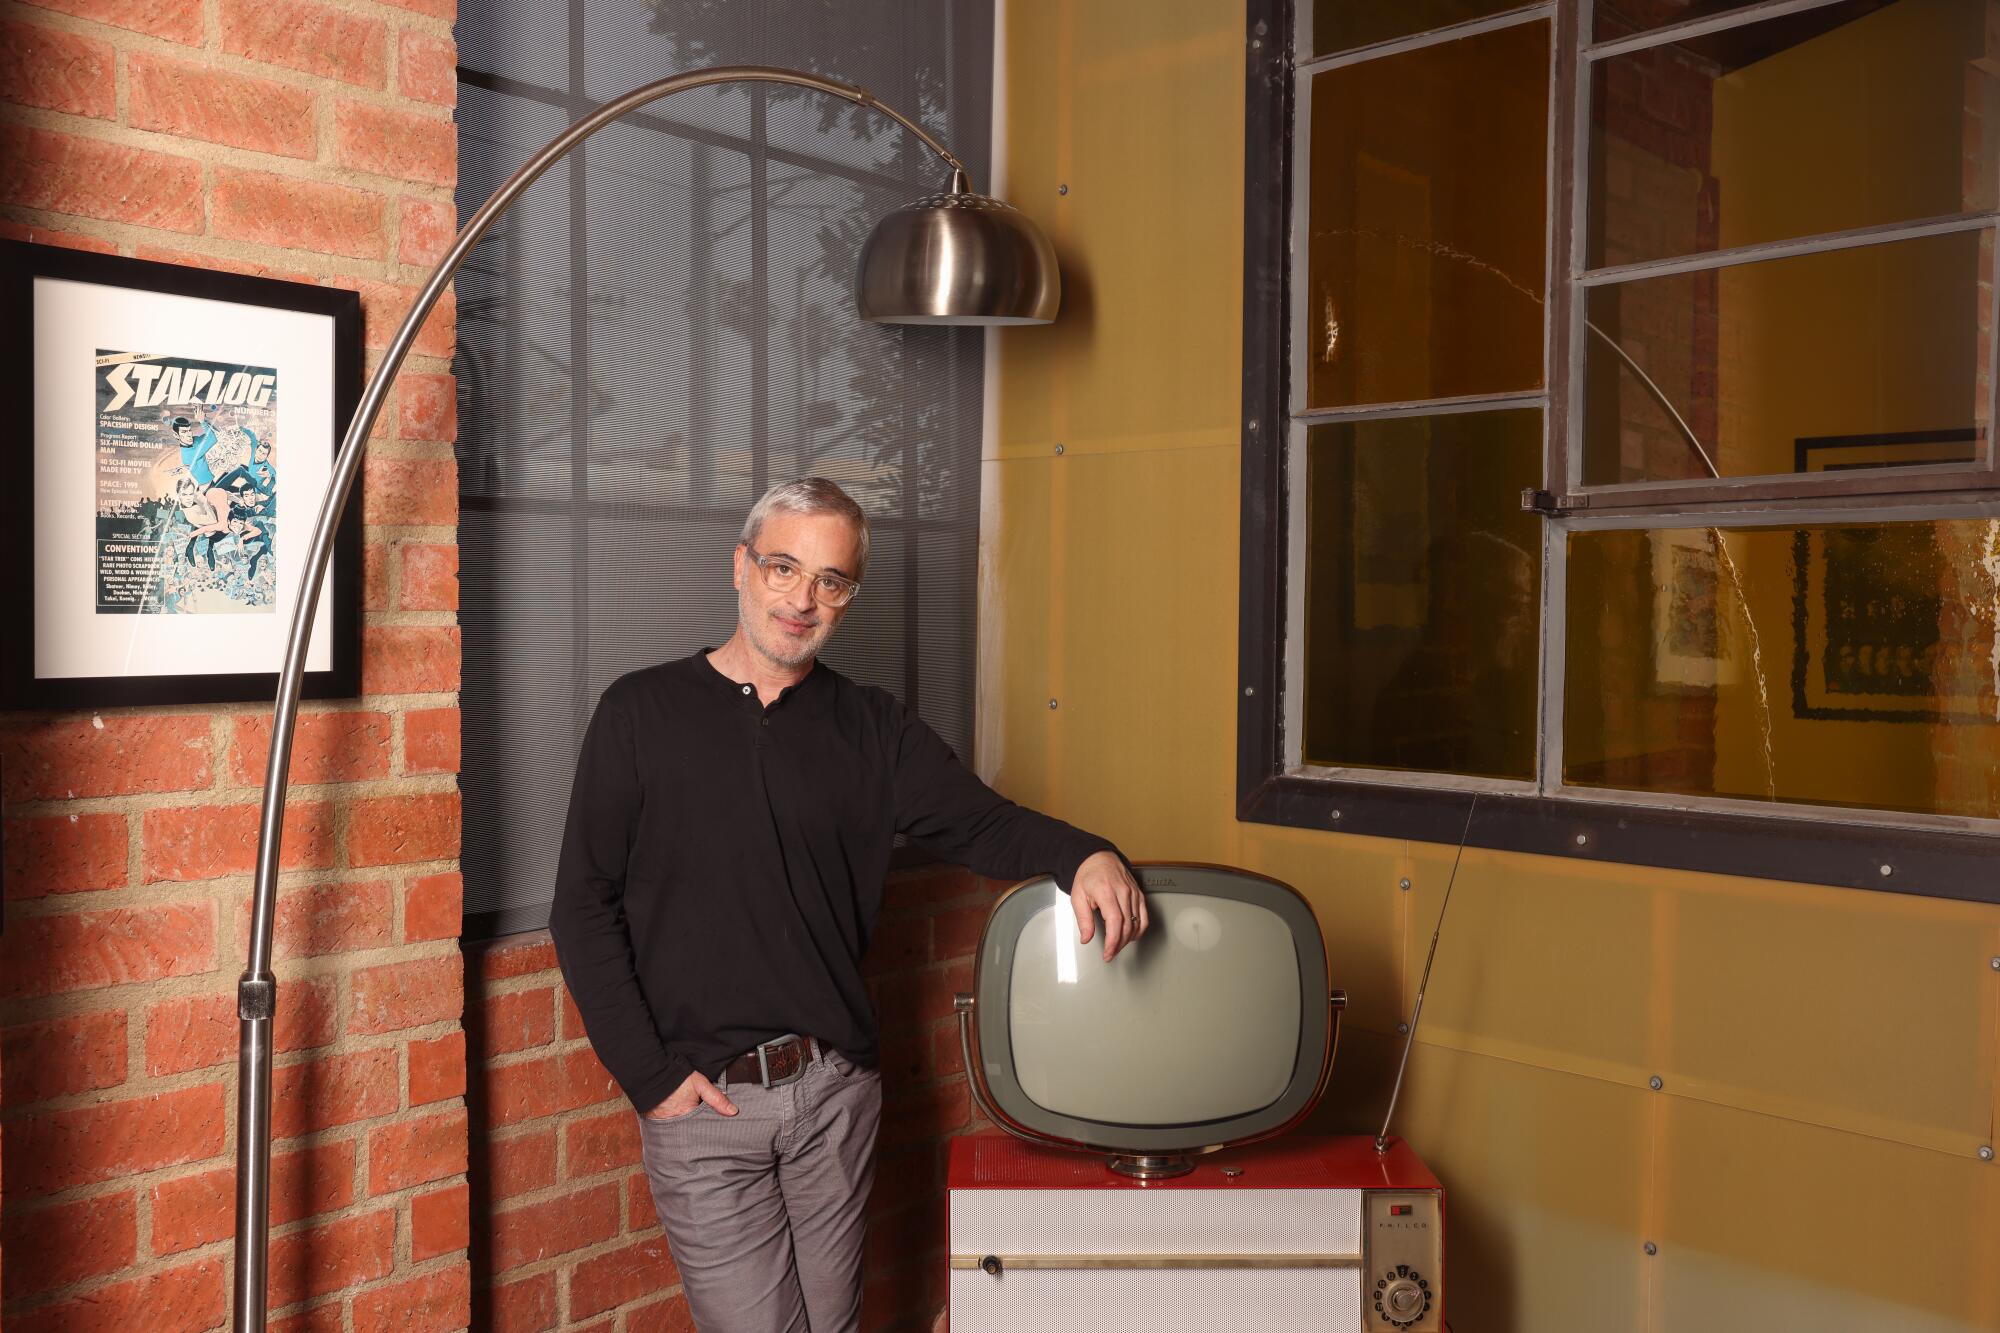 Alex Kurtzman leaning against an old TV set with a lamp hanging above him.